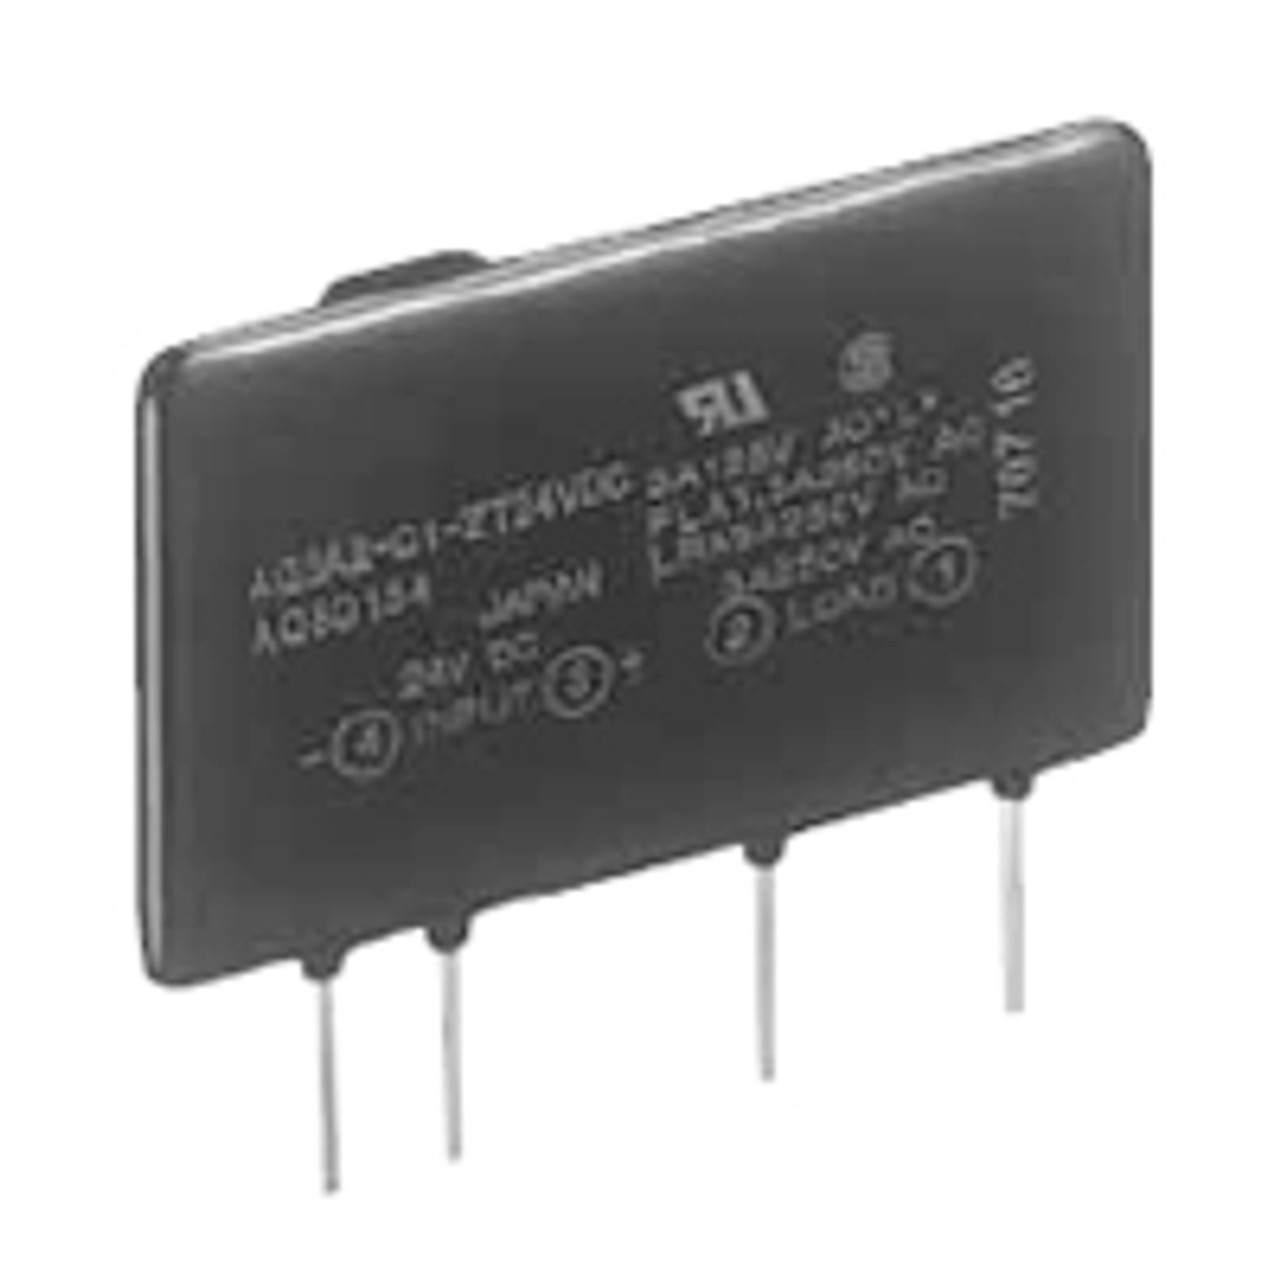 Panasonic Electric Works AQ3A2-C2-T5VDC Solid State